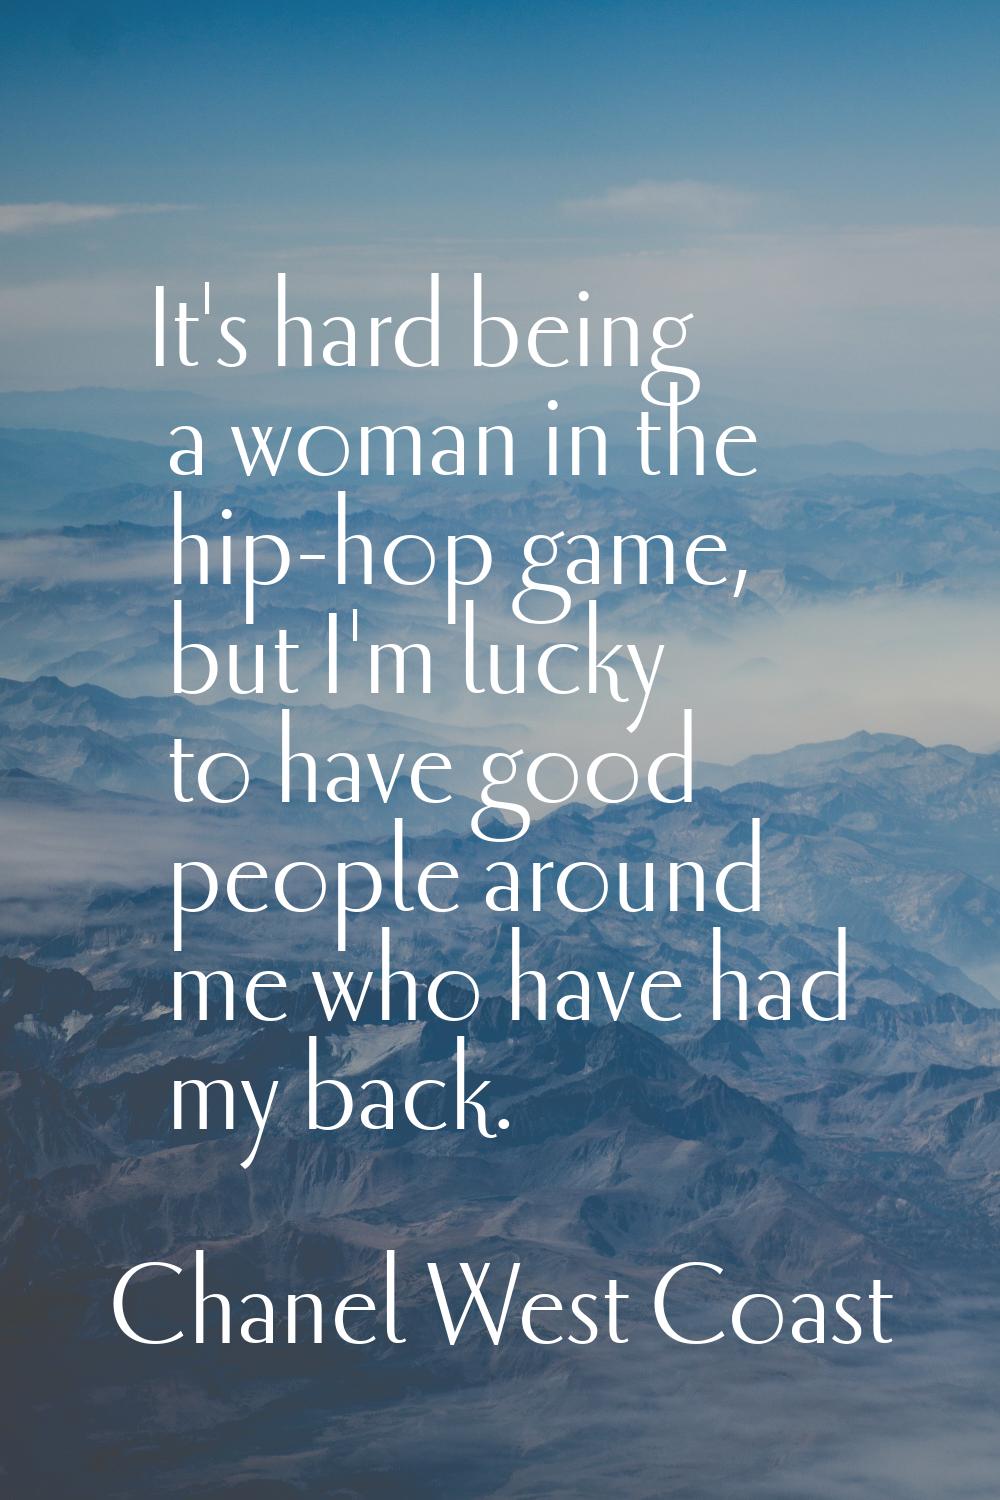 It's hard being a woman in the hip-hop game, but I'm lucky to have good people around me who have h